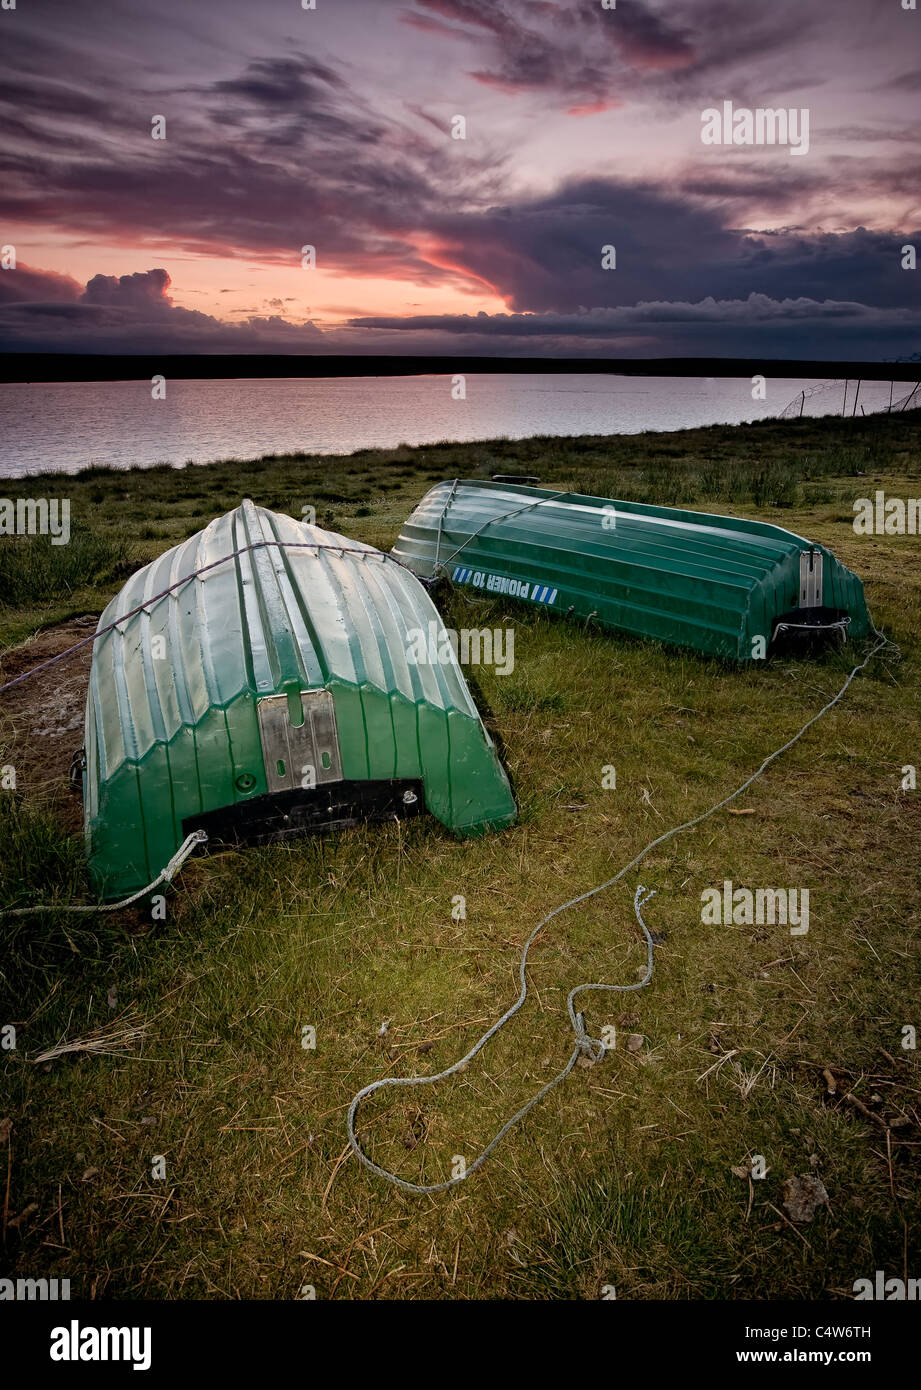 upturned rowing boats at a sailing club in the yorkshire pennines Stock Photo